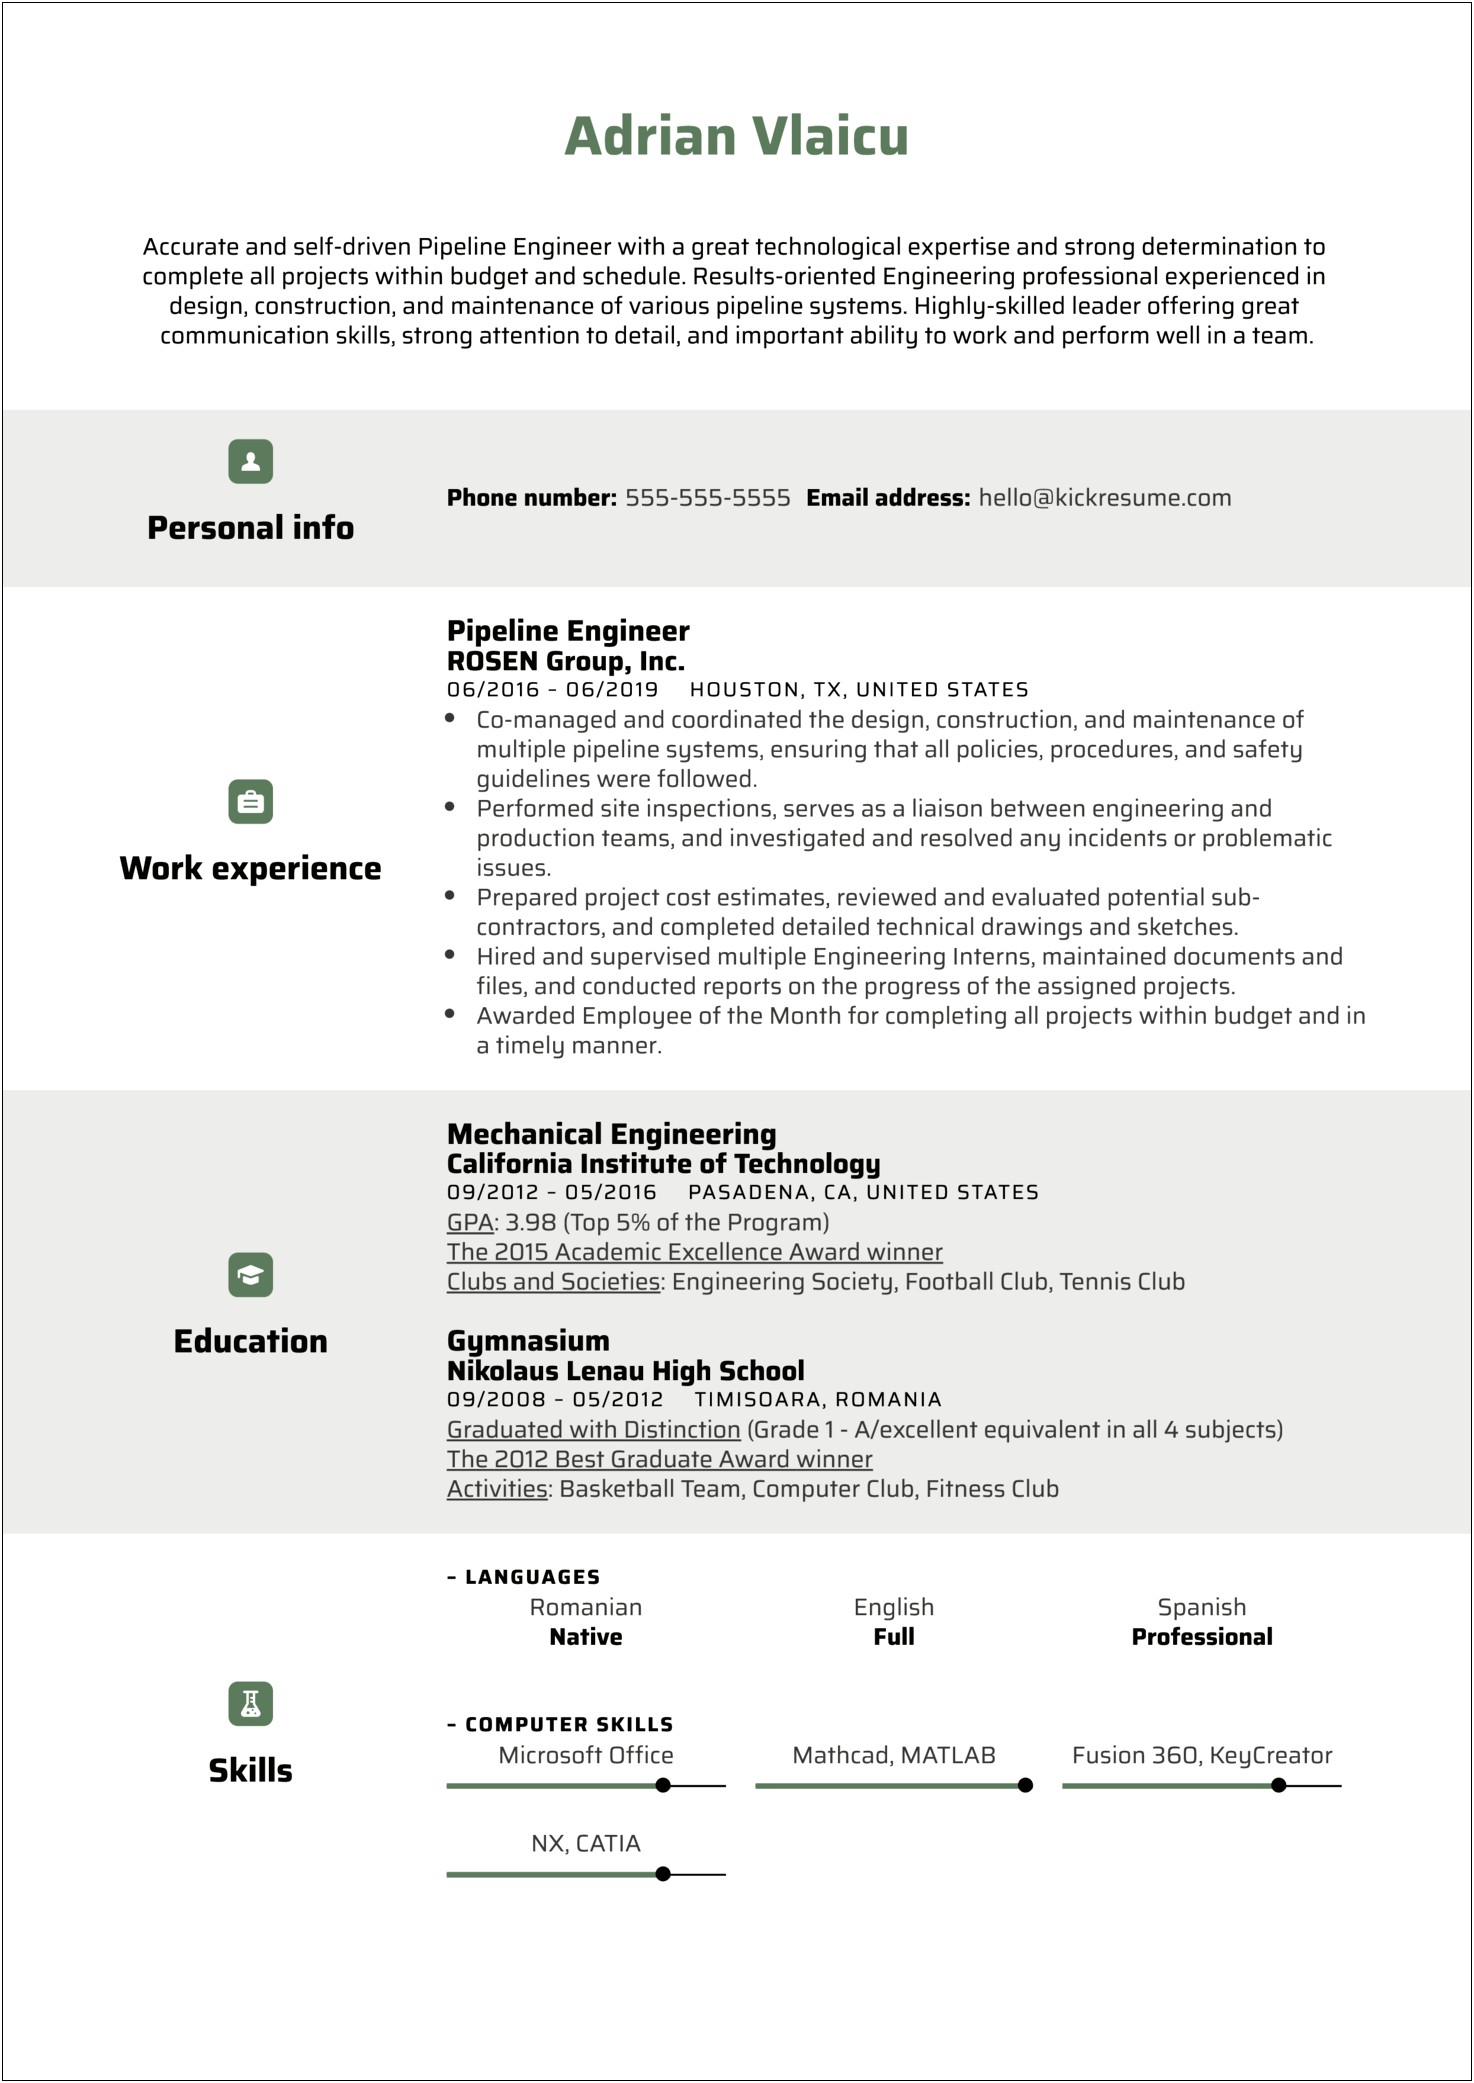 Piping Engineer 3 Years Experience Resume